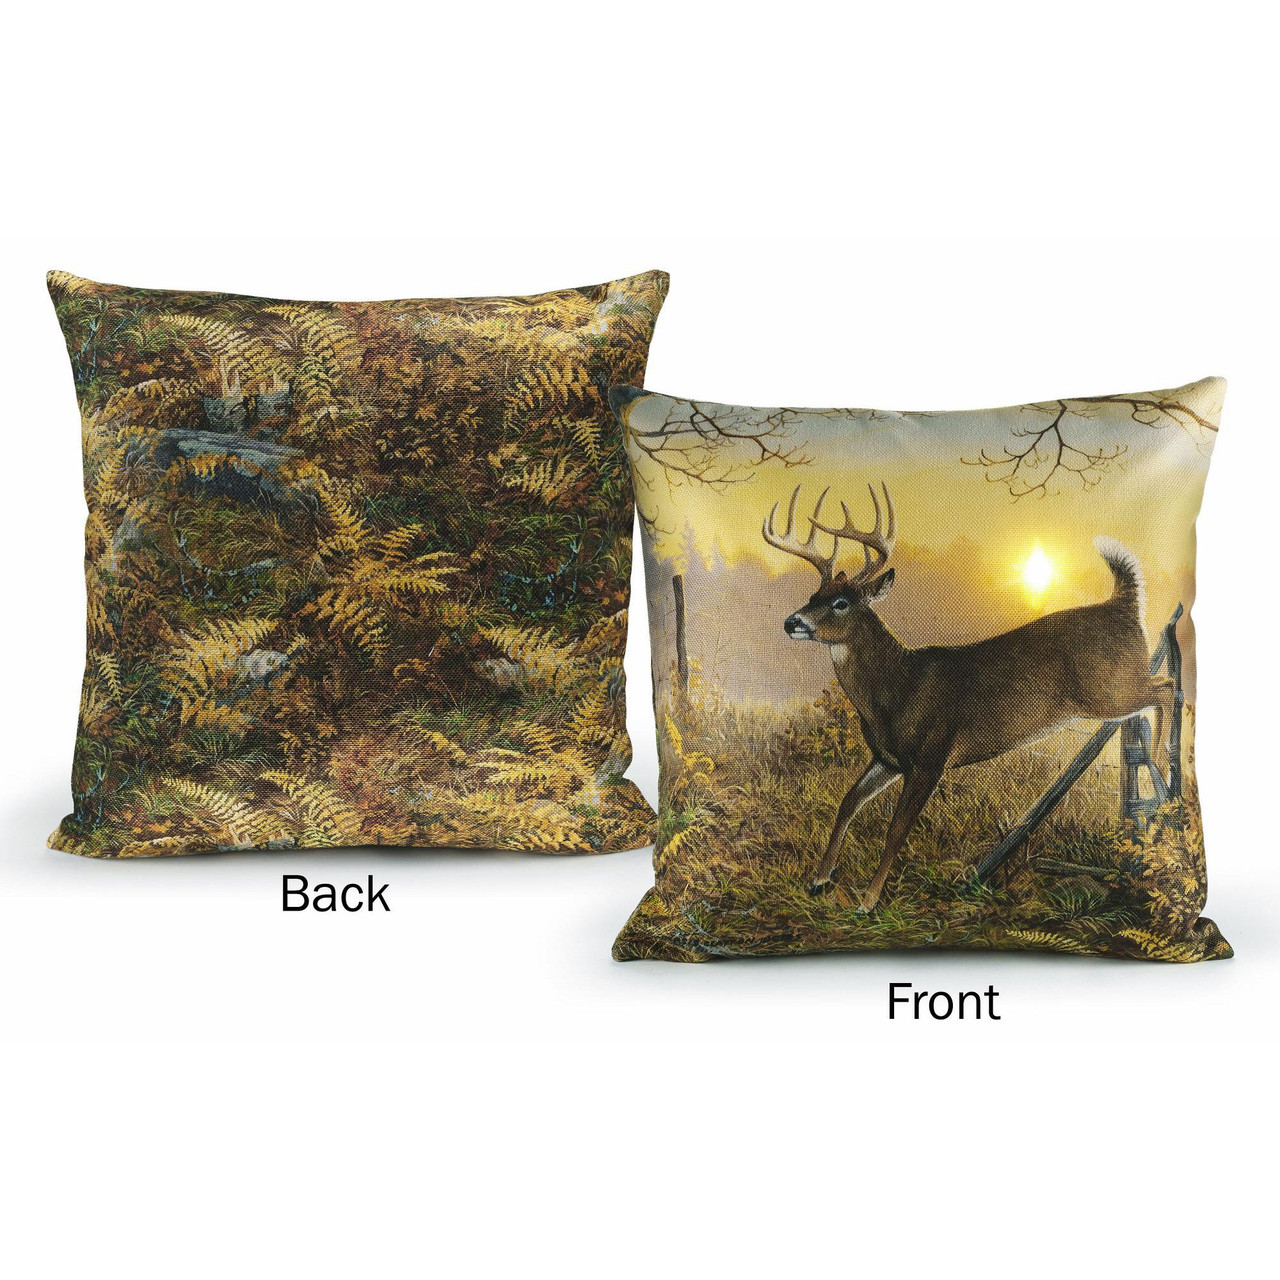 https://cdn11.bigcommerce.com/s-oo0gdojvjo/images/stencil/1280x1280/products/55909/77221/18-sunrise-retreat-whitetail-deer-decorative-square-throw-pillows-set-of-2-wild-wings__97664.1605868121.jpg?c=2